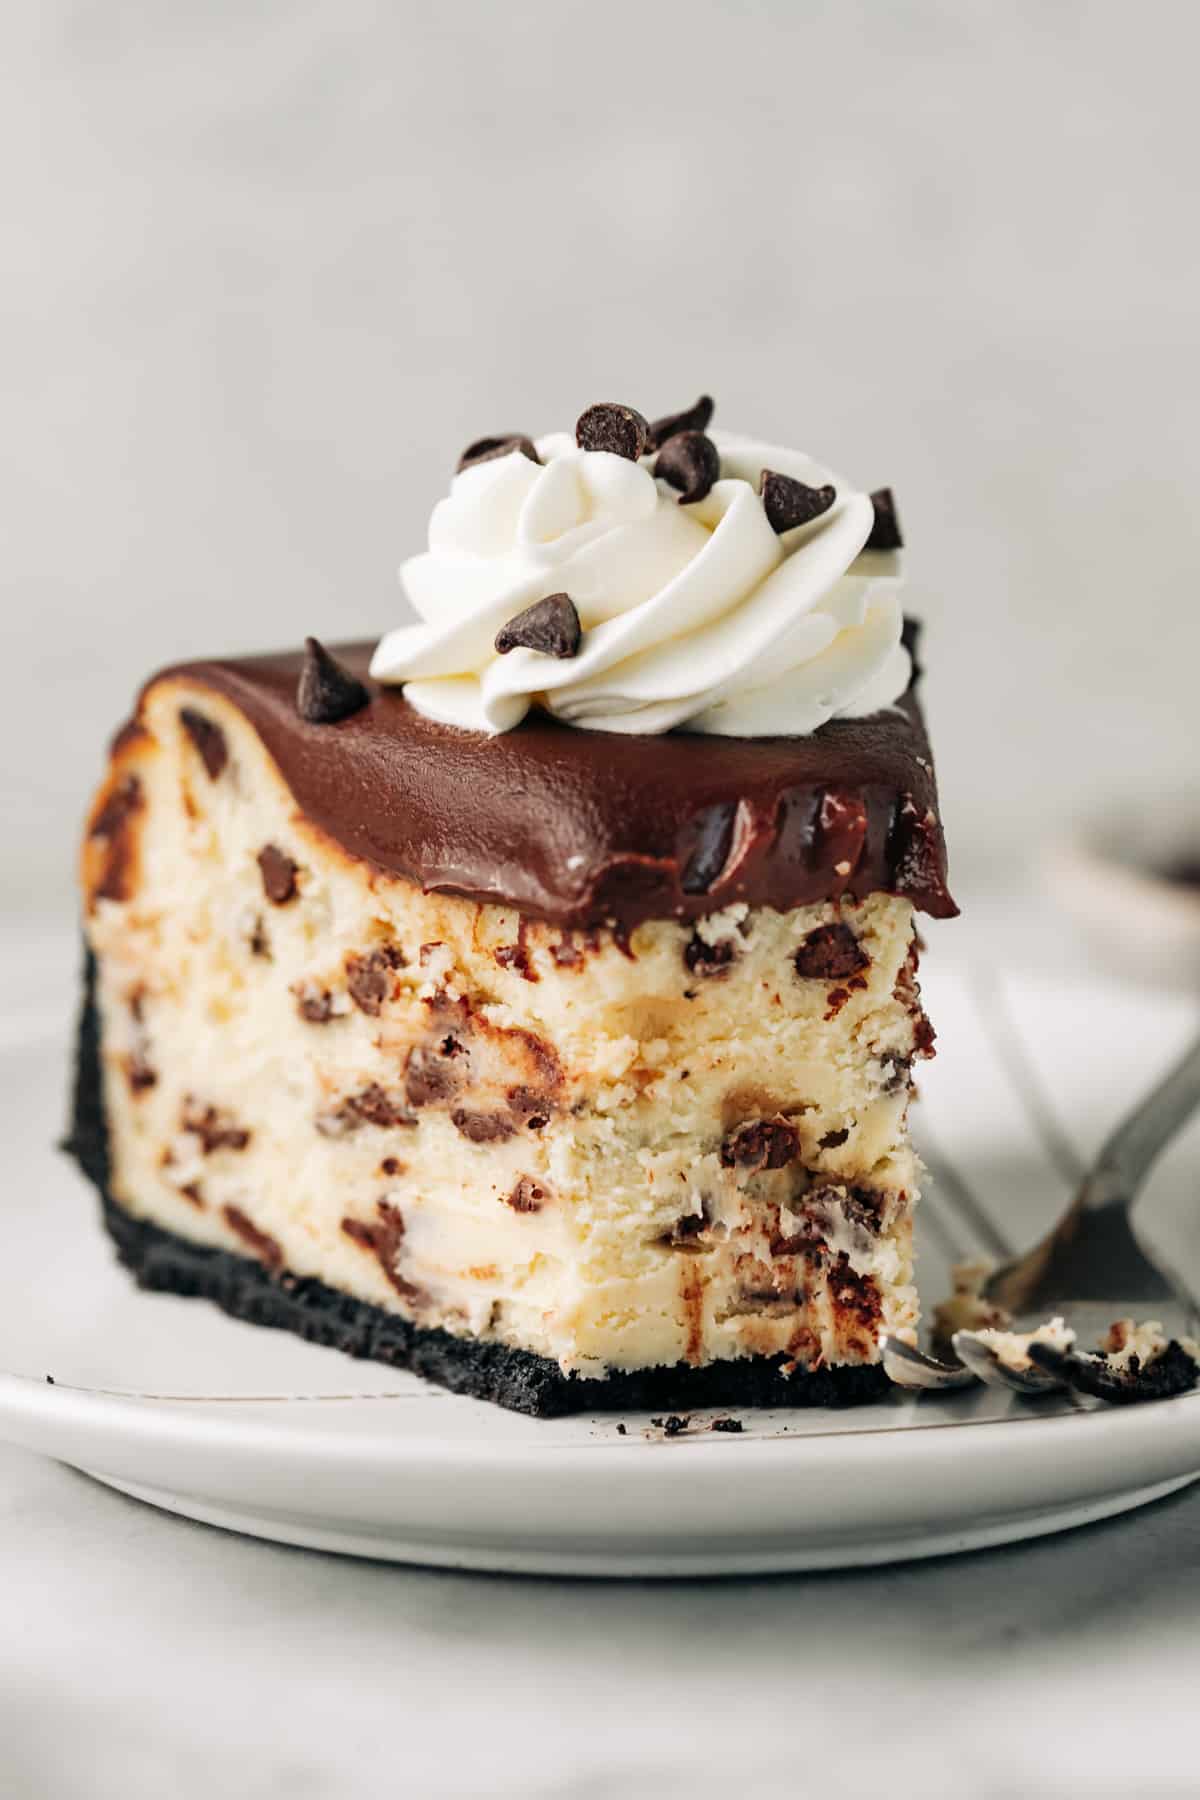 slice of creamy chocolate chip cheesecake on a plate.